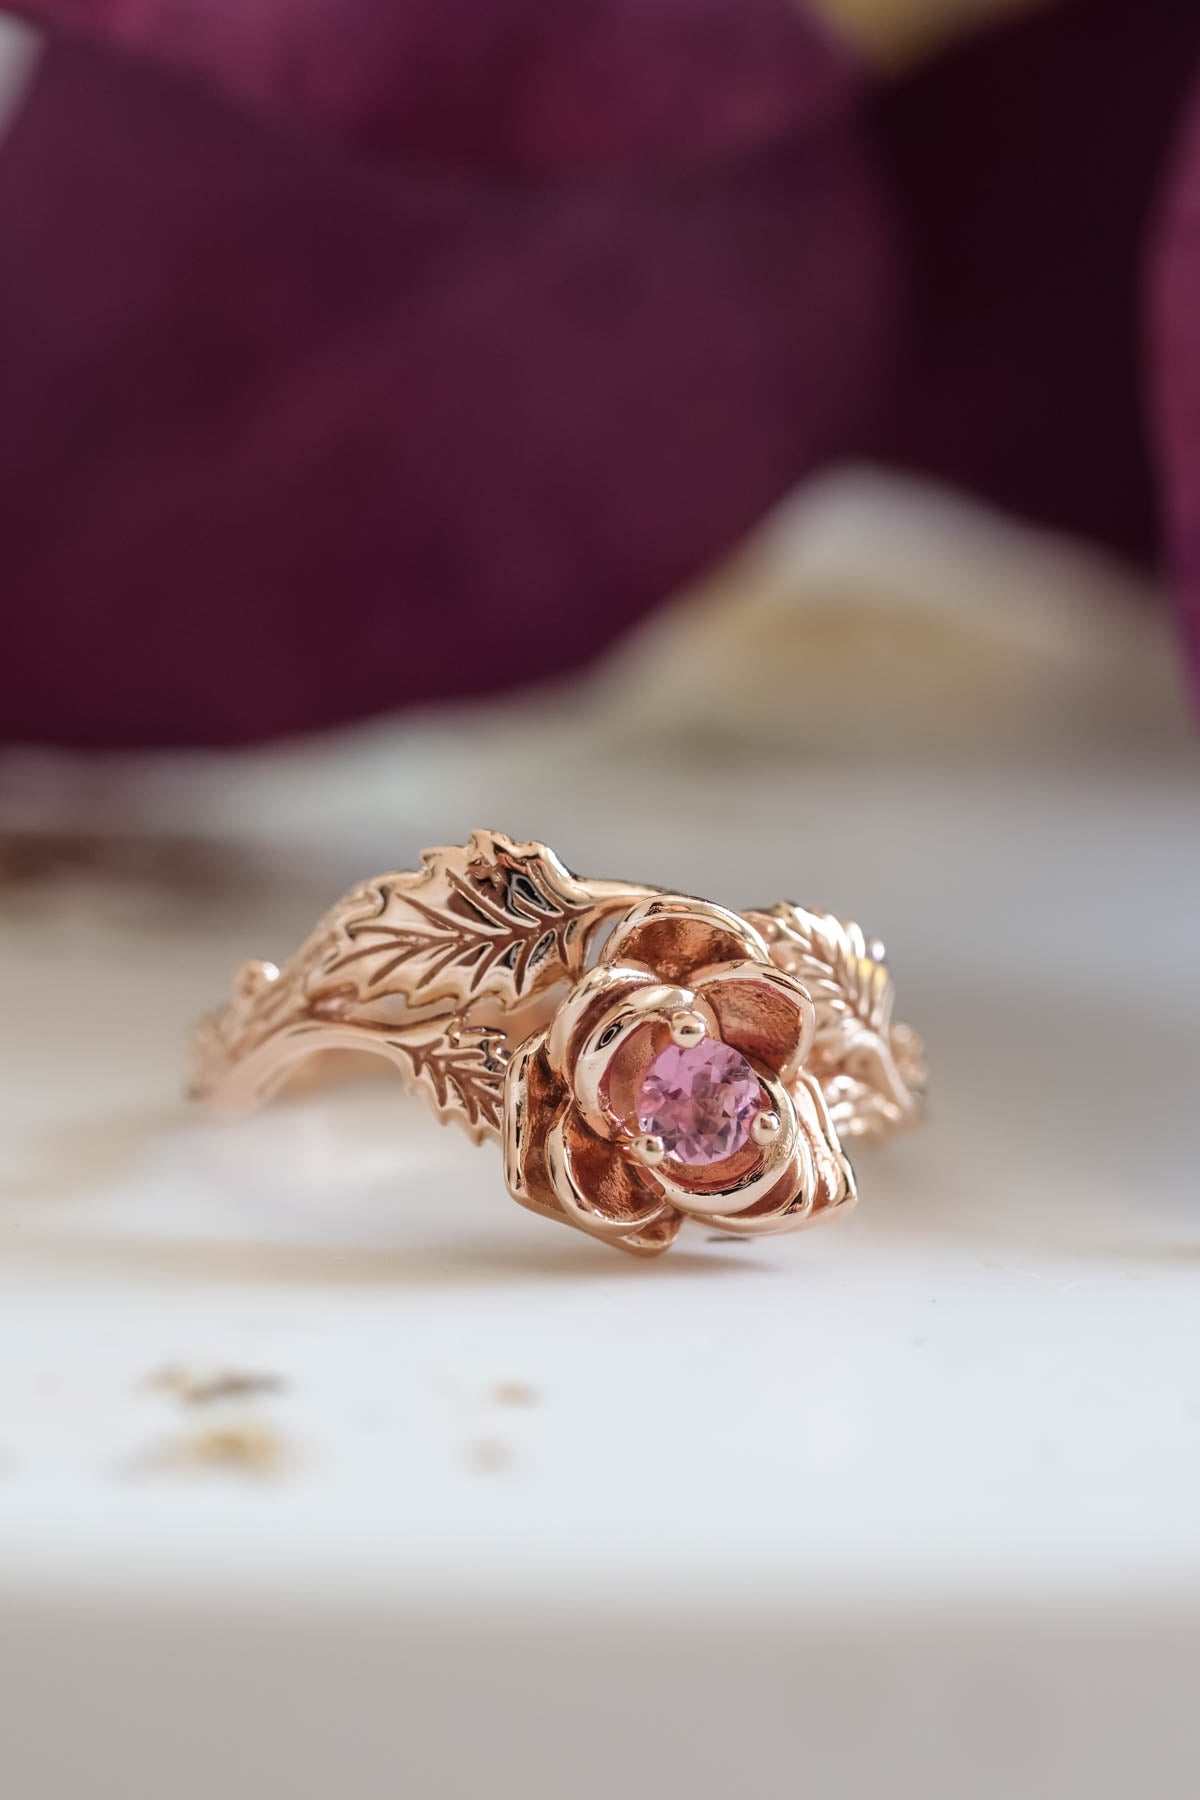 An Amazing Crafted Rose Gold Diamond Ladies Ring